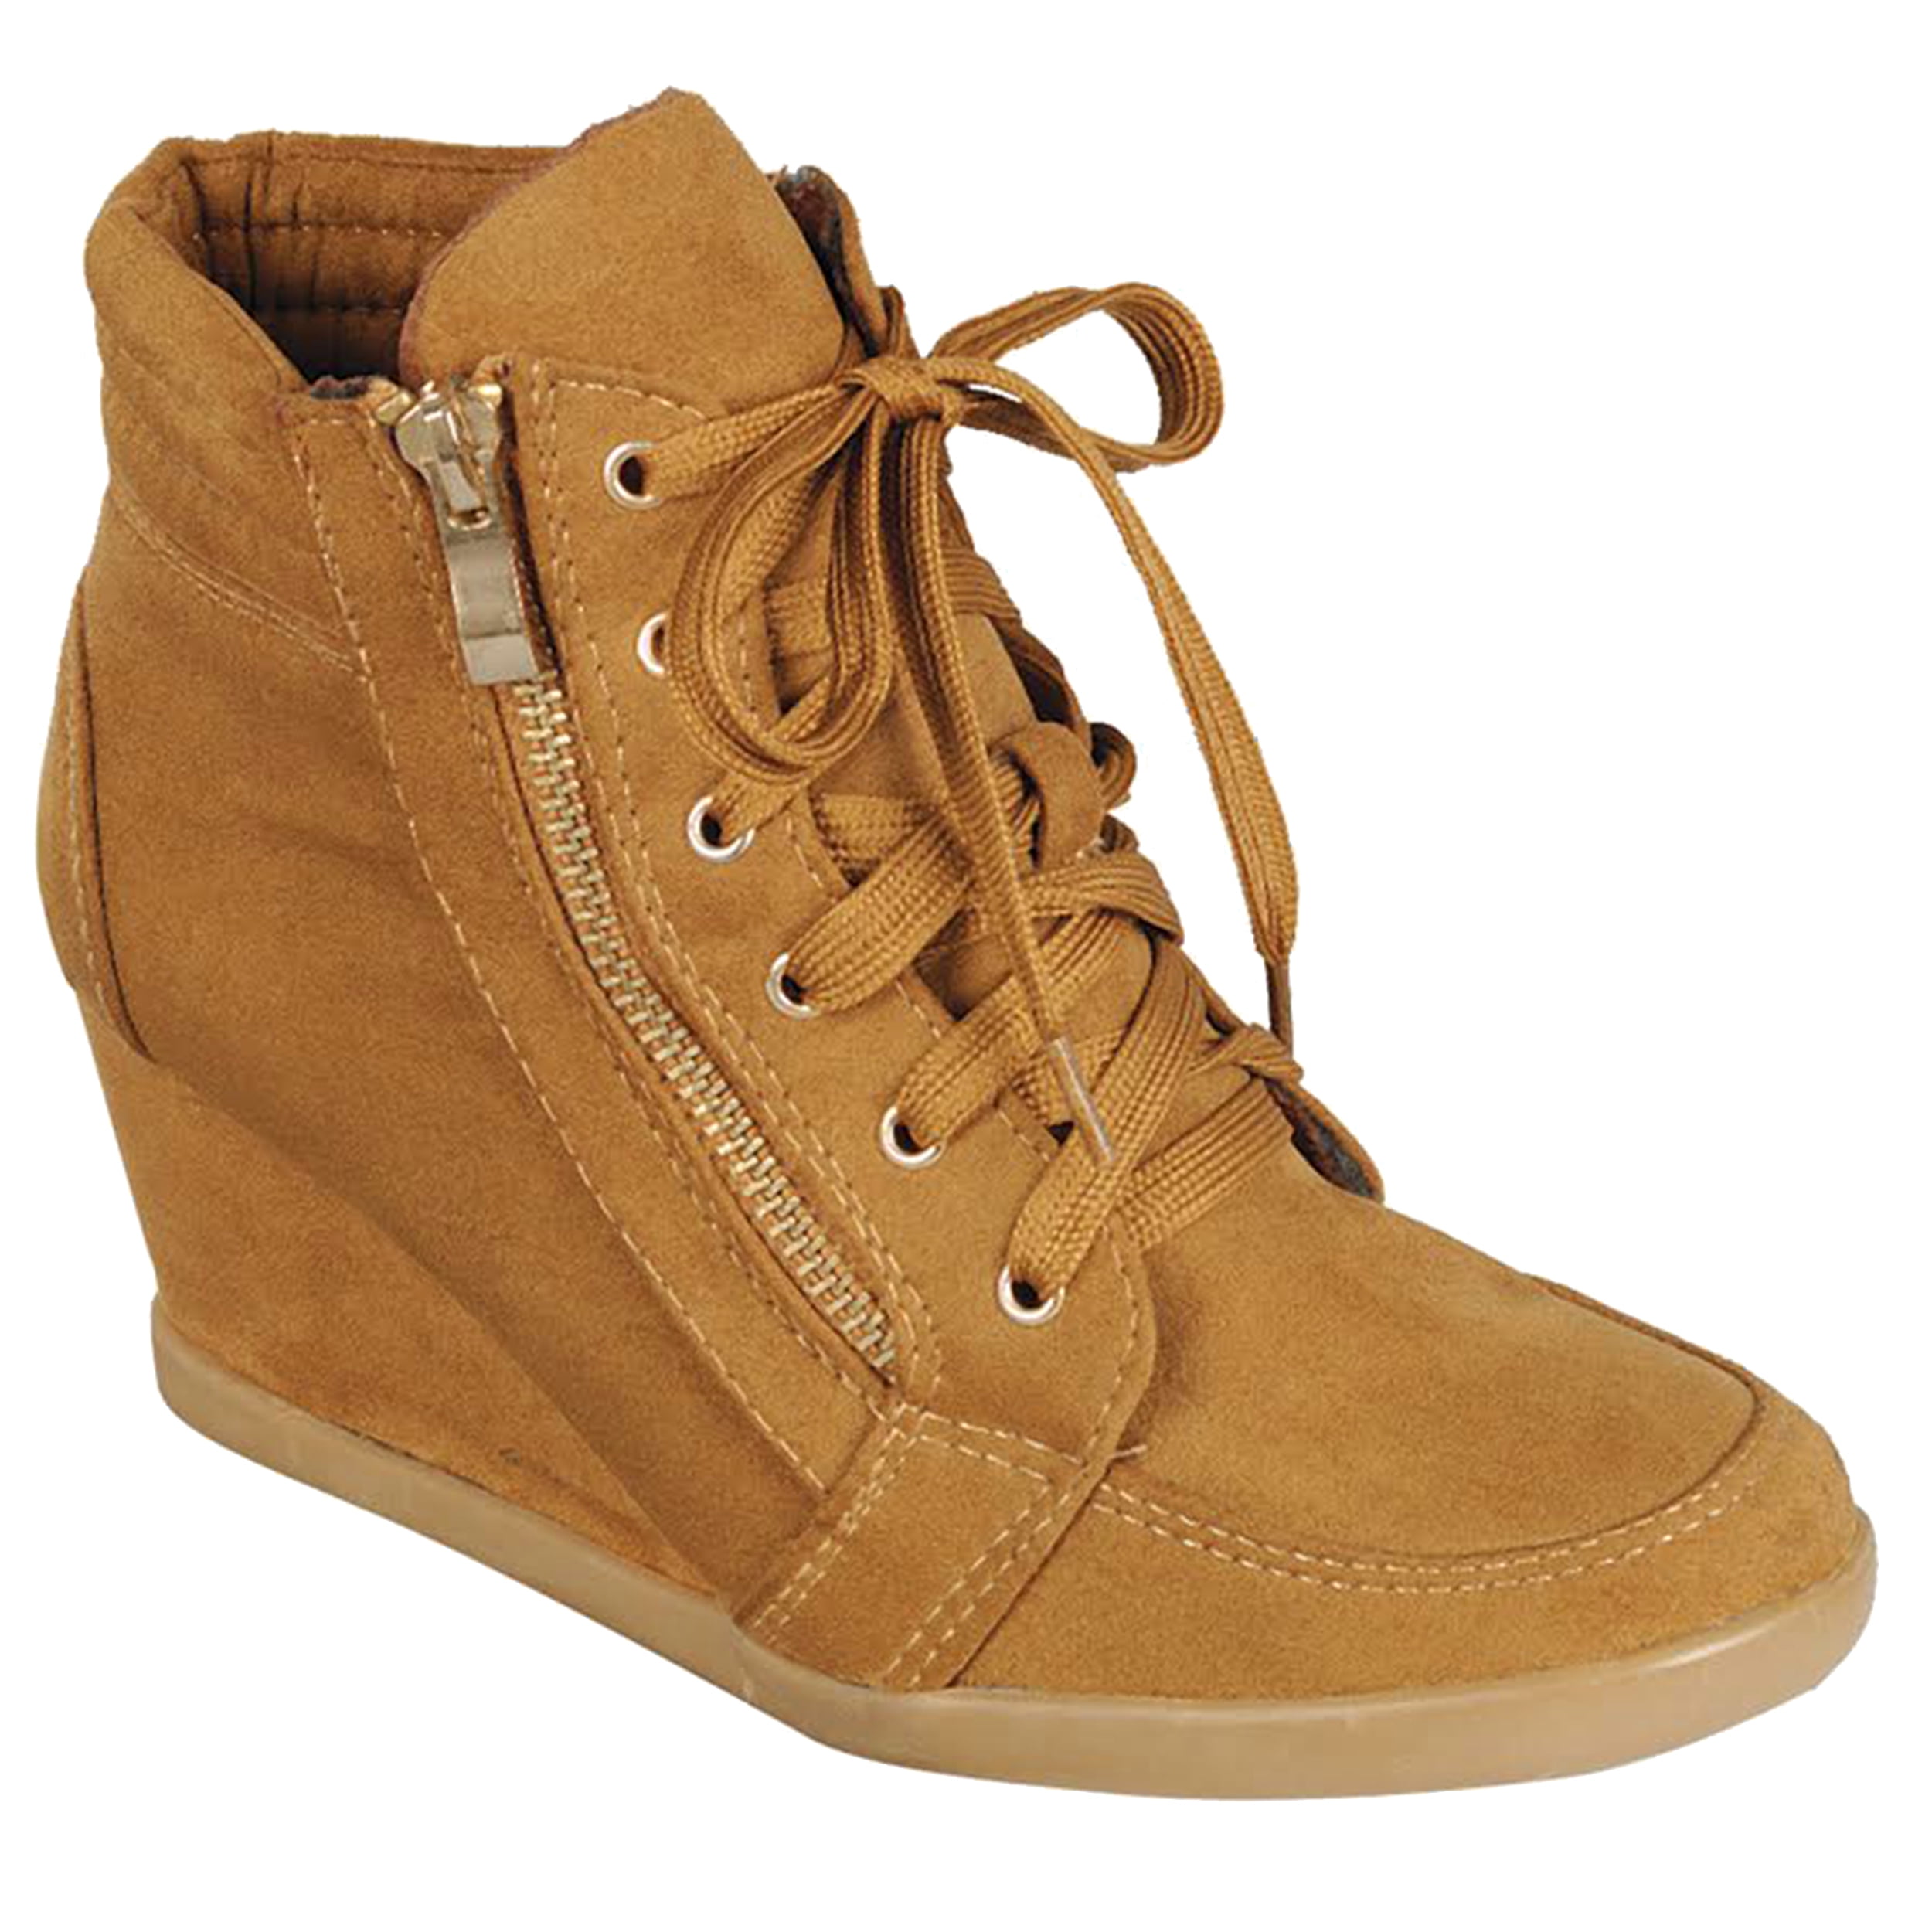 Women High Top Heel Sneakers Lace Up Shoes Ankle Bootie Walmart.com